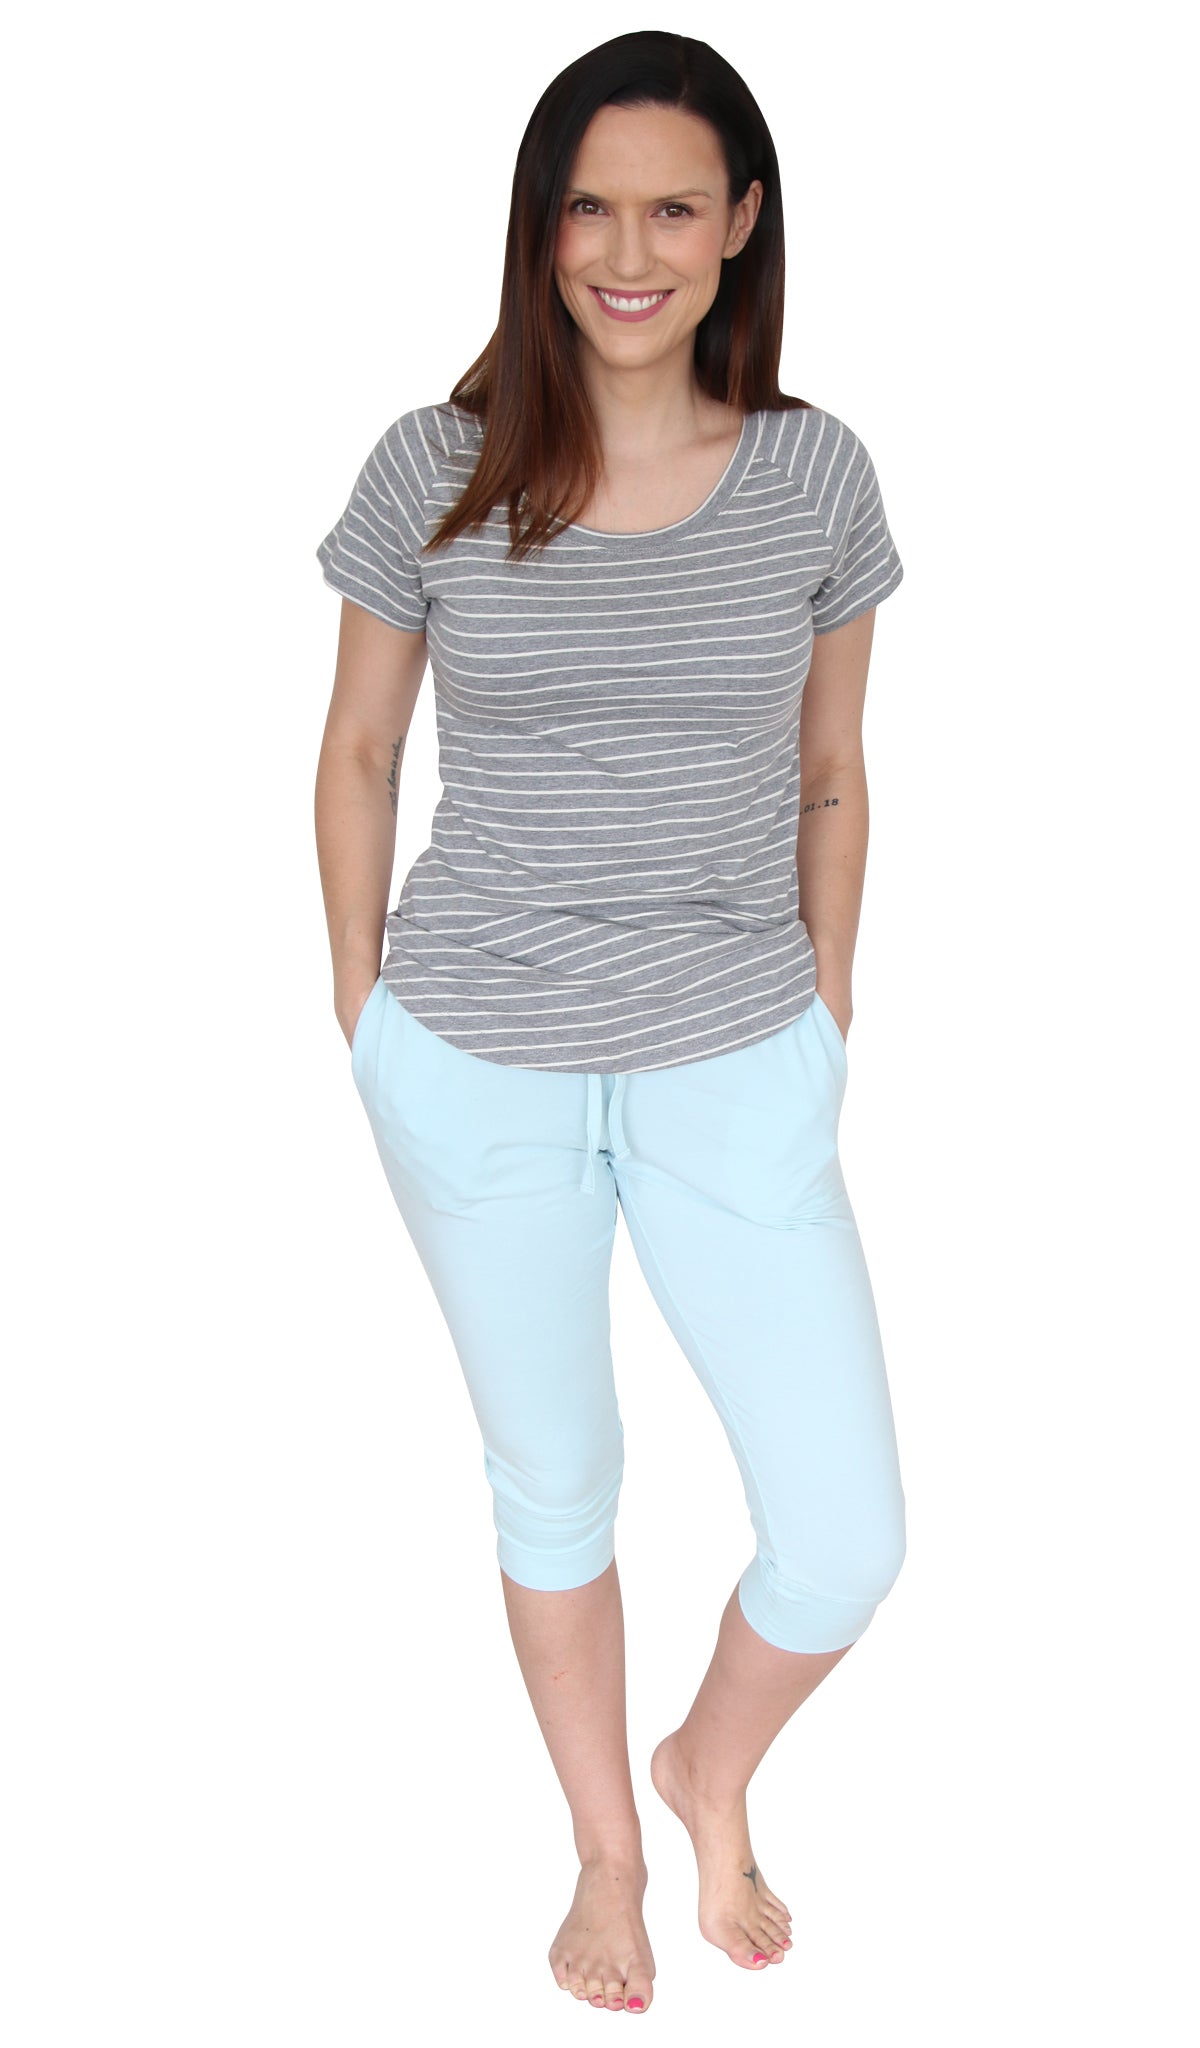 Bluebell and Lily Hahei Capri Pants in Seafoam coloured Cotton Elastine with Elasticated Waistband and Drawstring